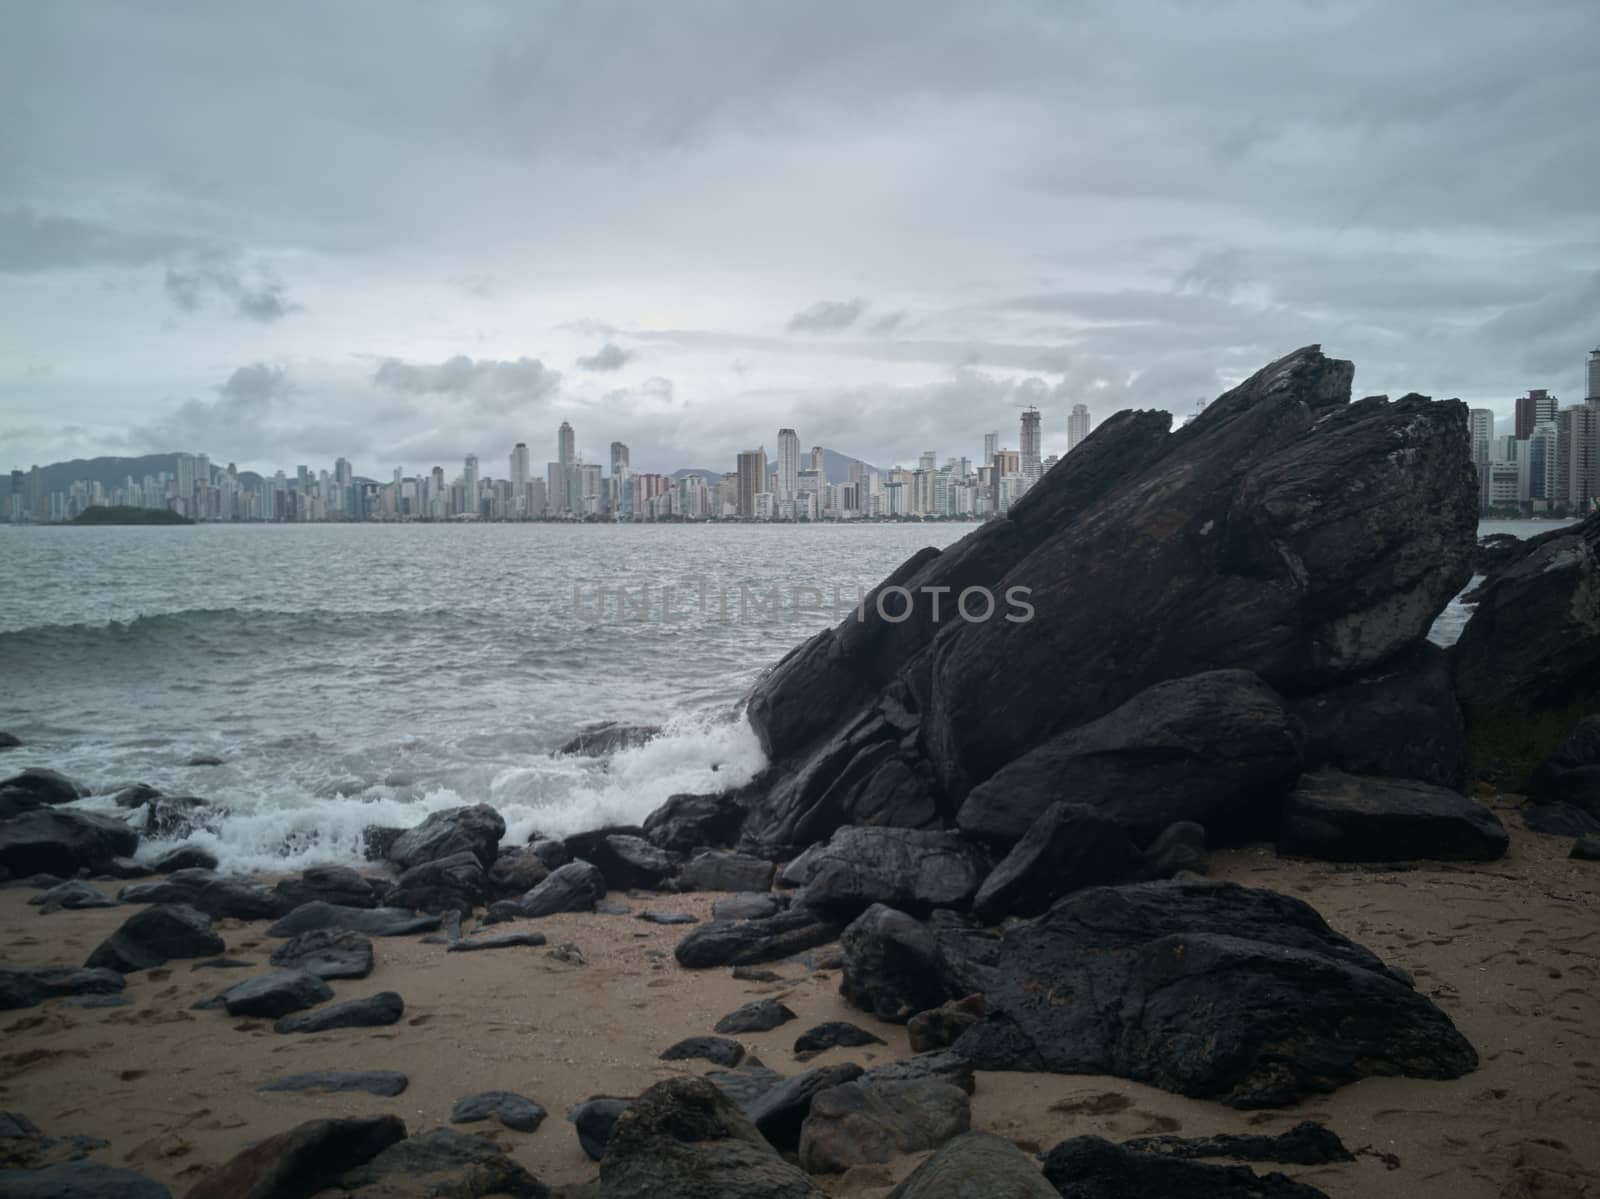 Rocks on the beach after the storm by raul_ruiz